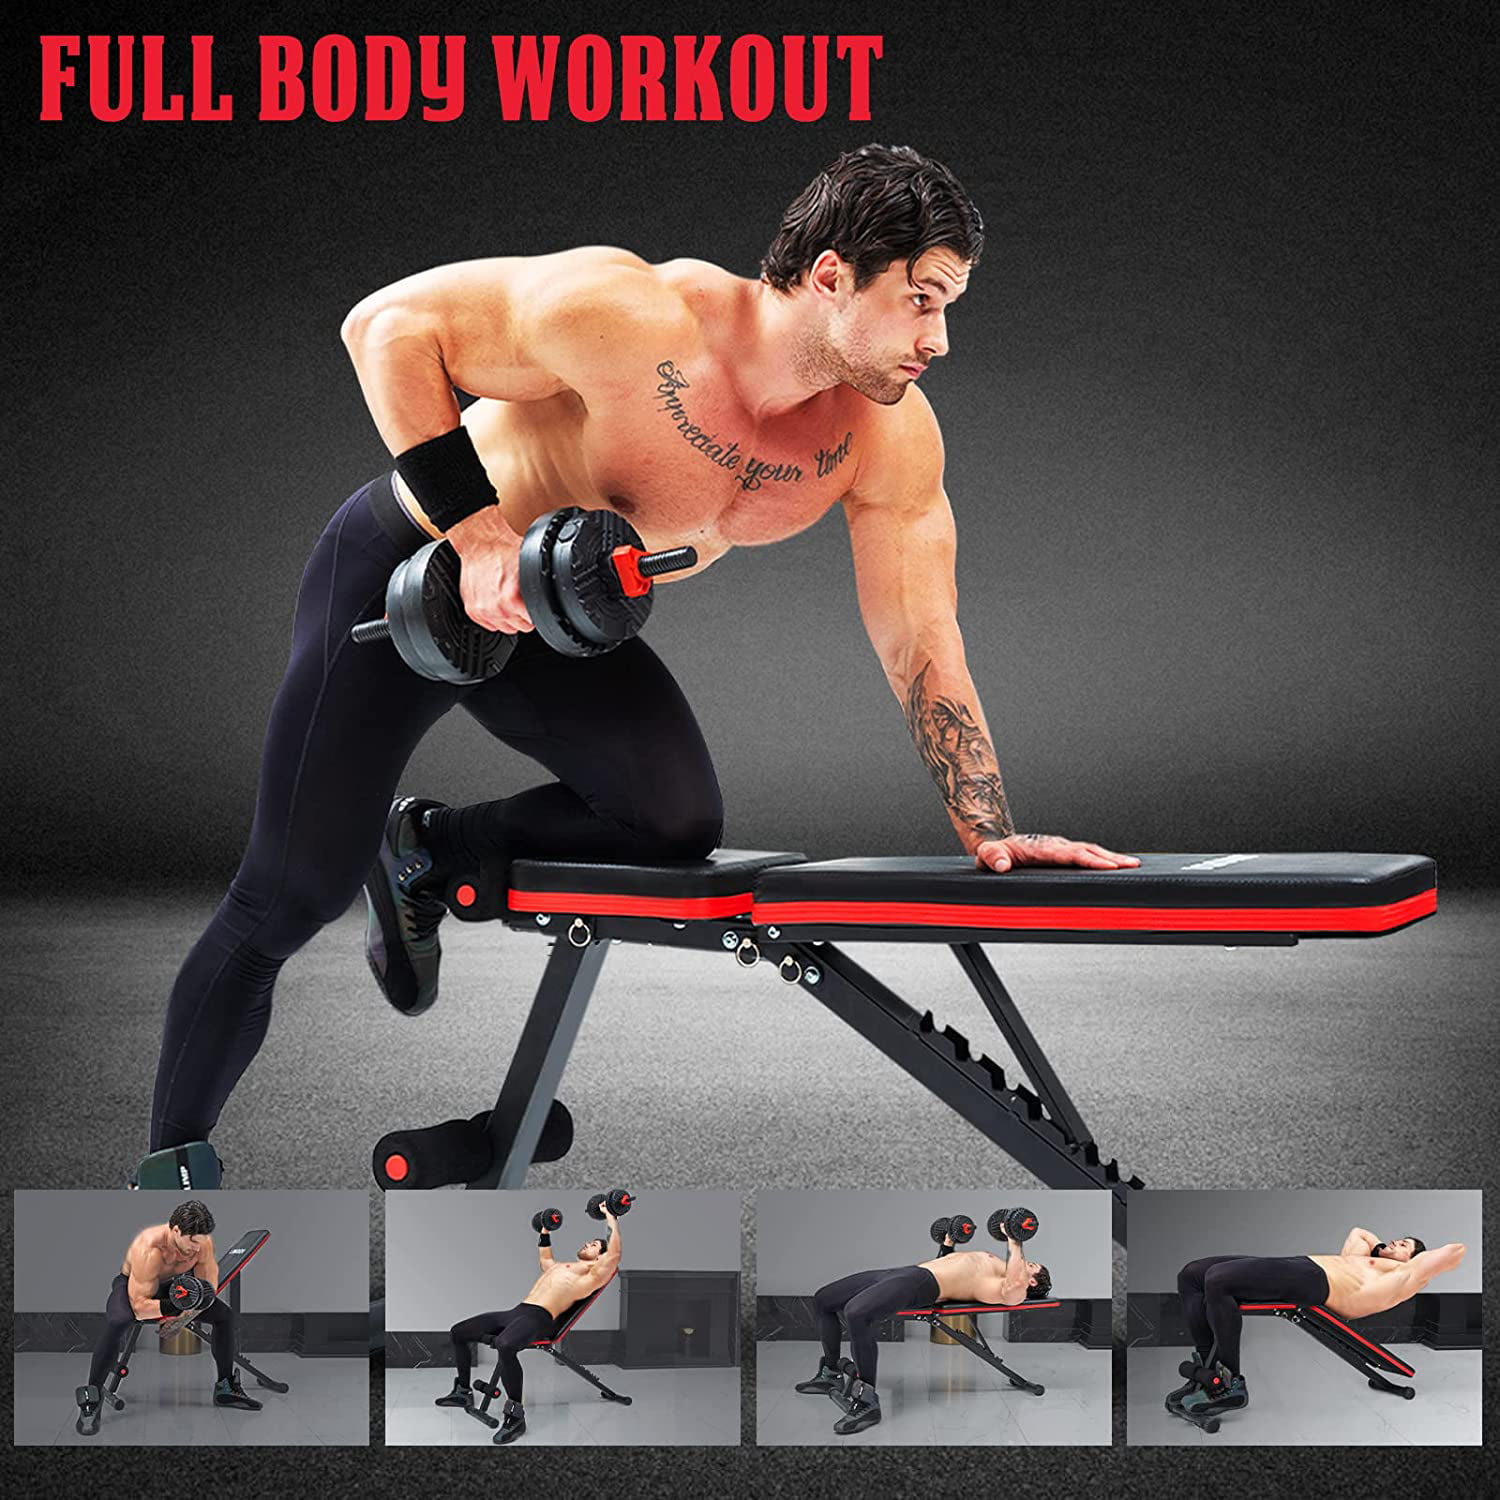 22in1 Ab Workout Bench Full Body Strength Training Wonder Master Adjustable Weight Bench with Rowing Extension Foldable Incline Decline Benches Load 330LBS 